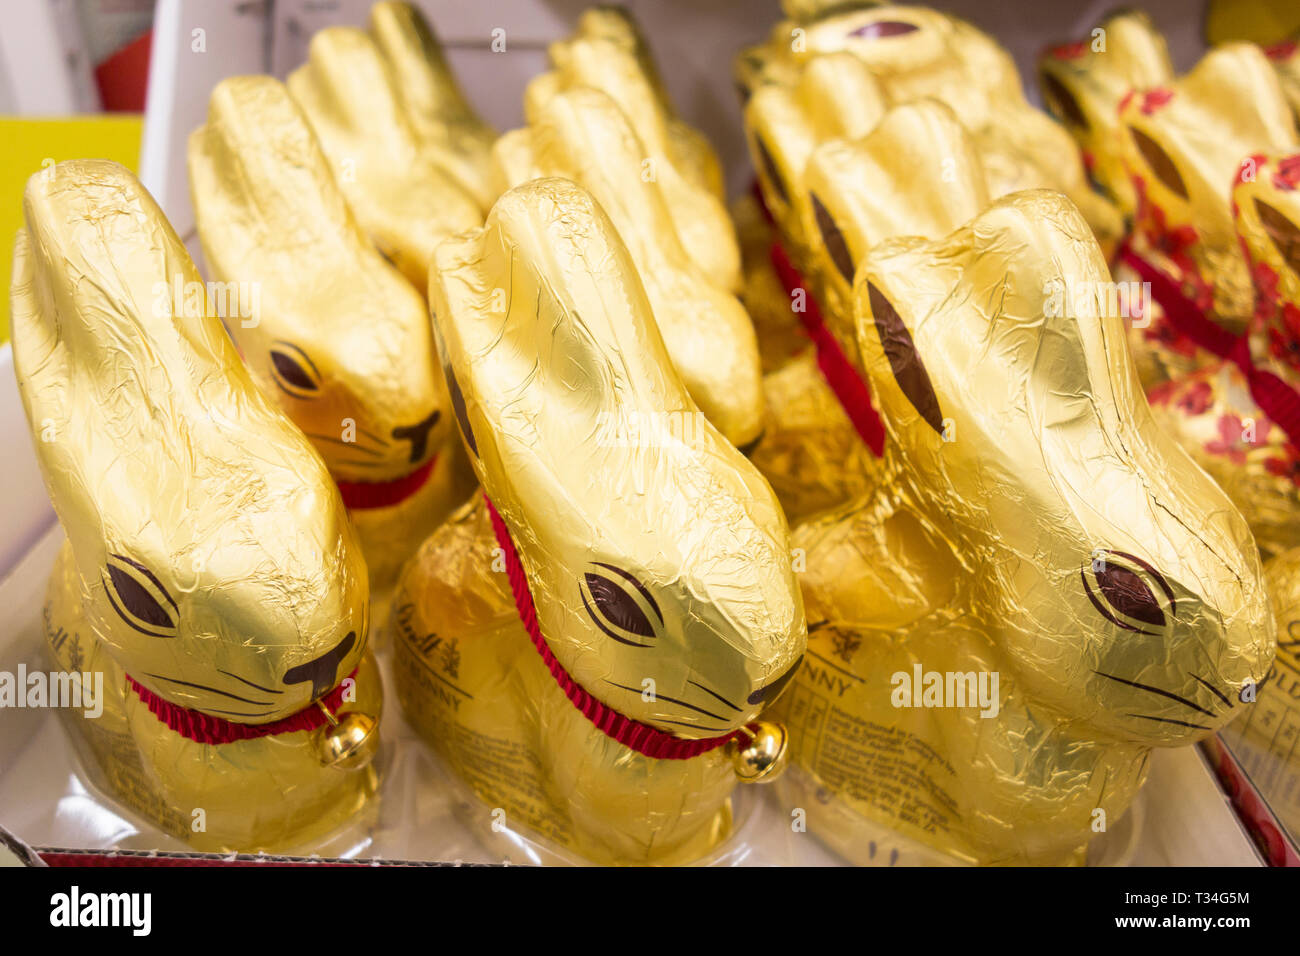 Lindt Golden Milk Chocholate Bunnies on a supermarket shelf in the UK Stock Photo